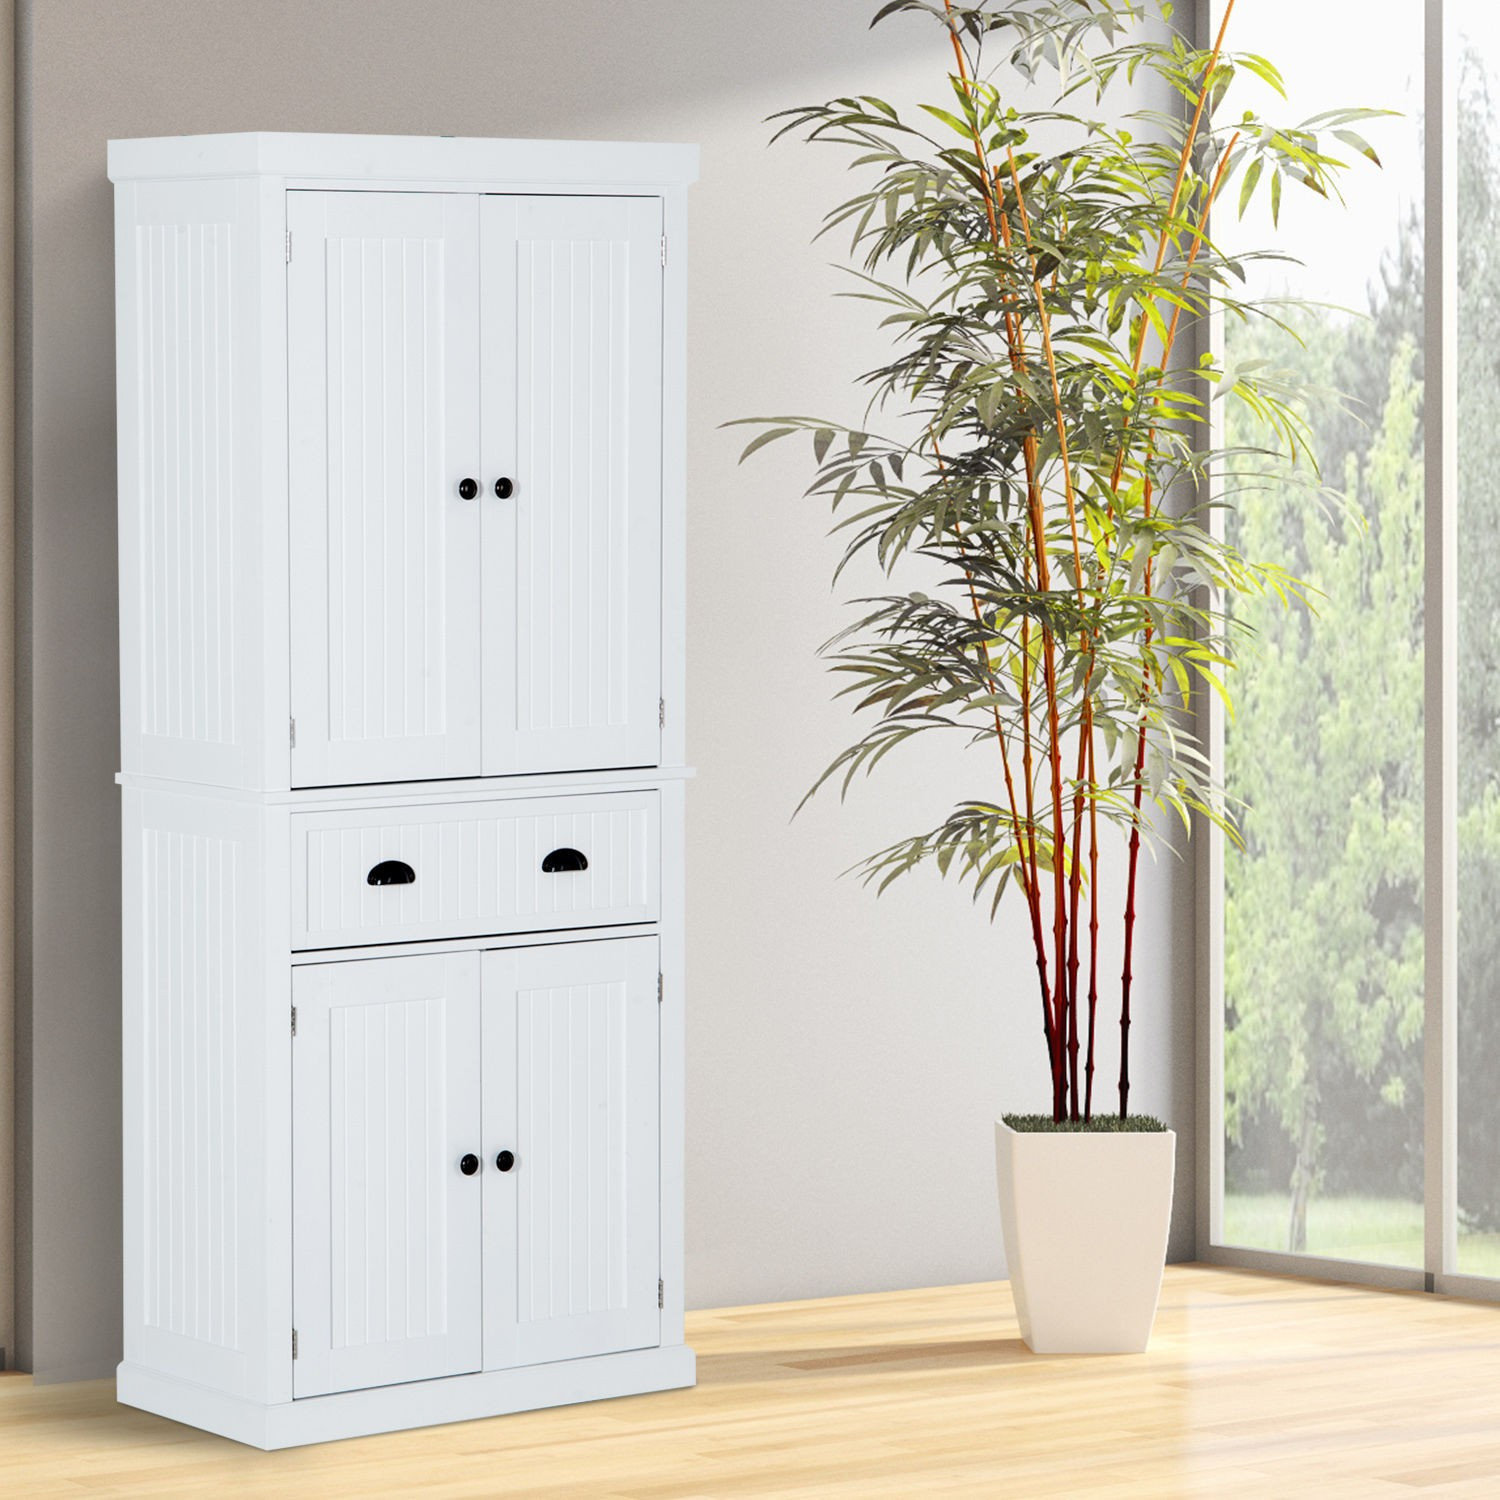 White Kitchen Pantry Free Standing
 Hom Free Standing Colonial Wood Storage Cabinet